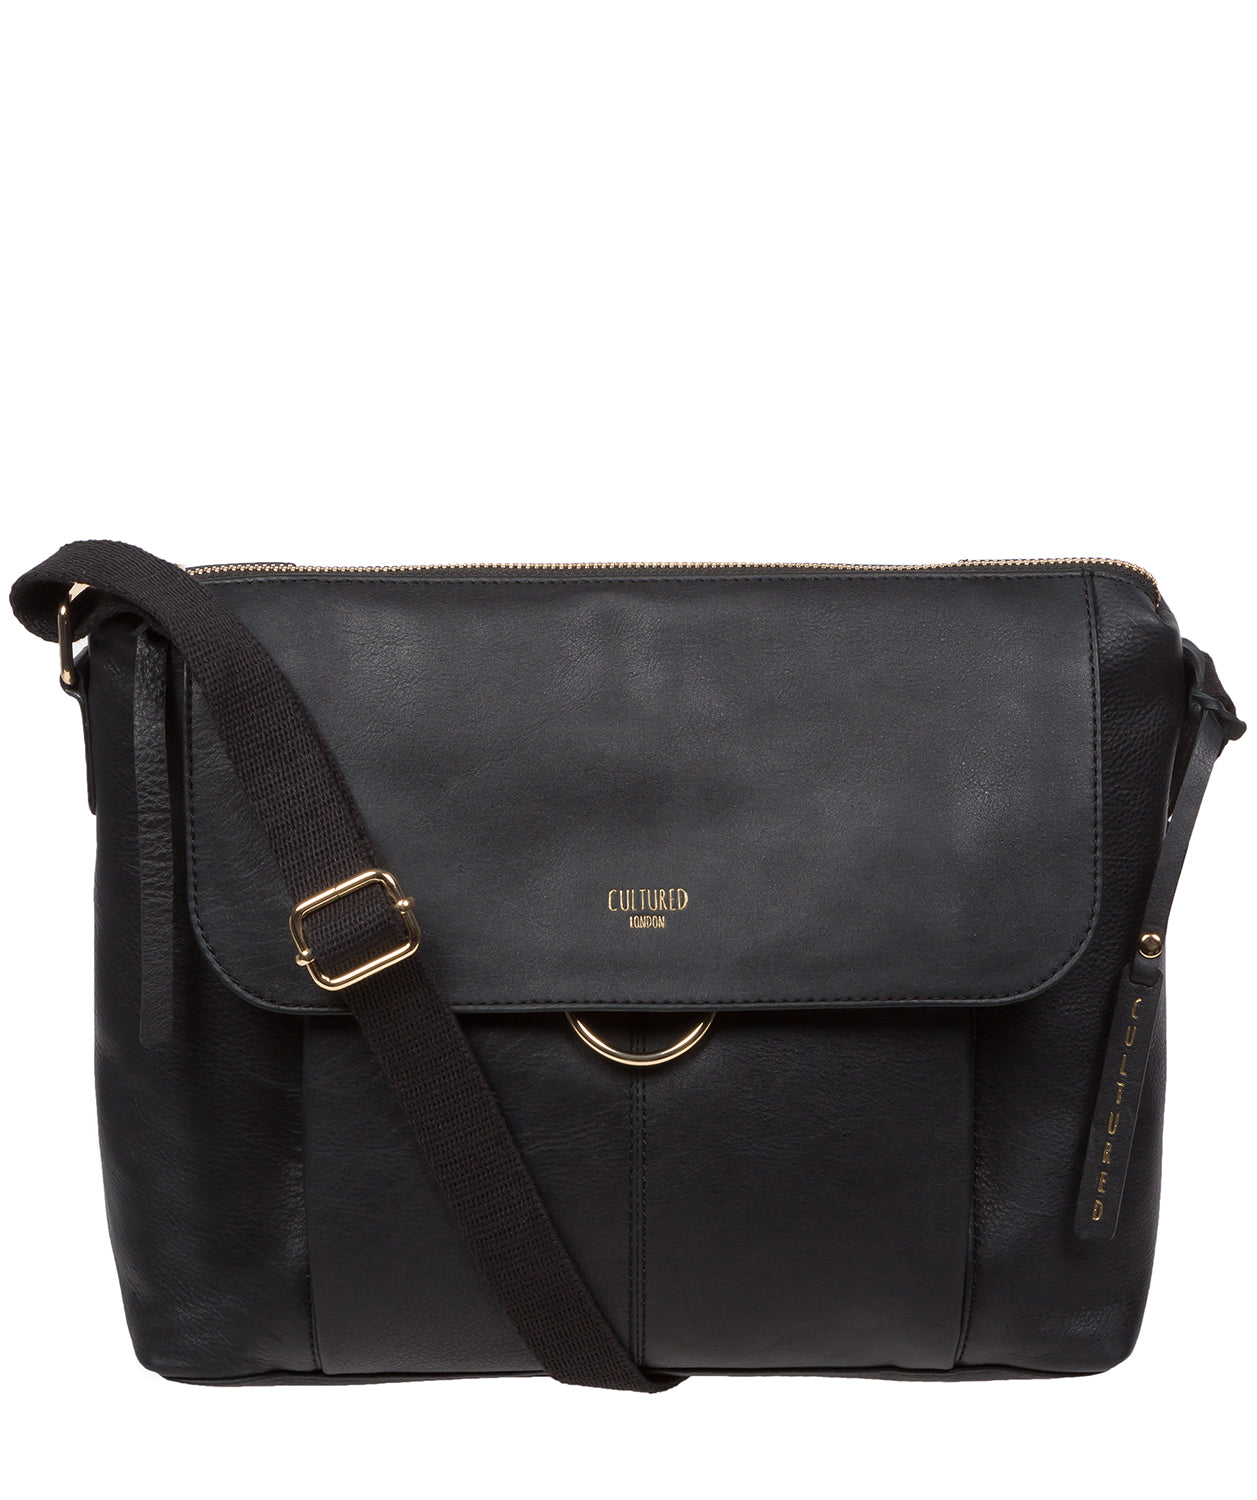 Black Leather Shoulder Bag 'Chancery' by Cultured London – Pure ...